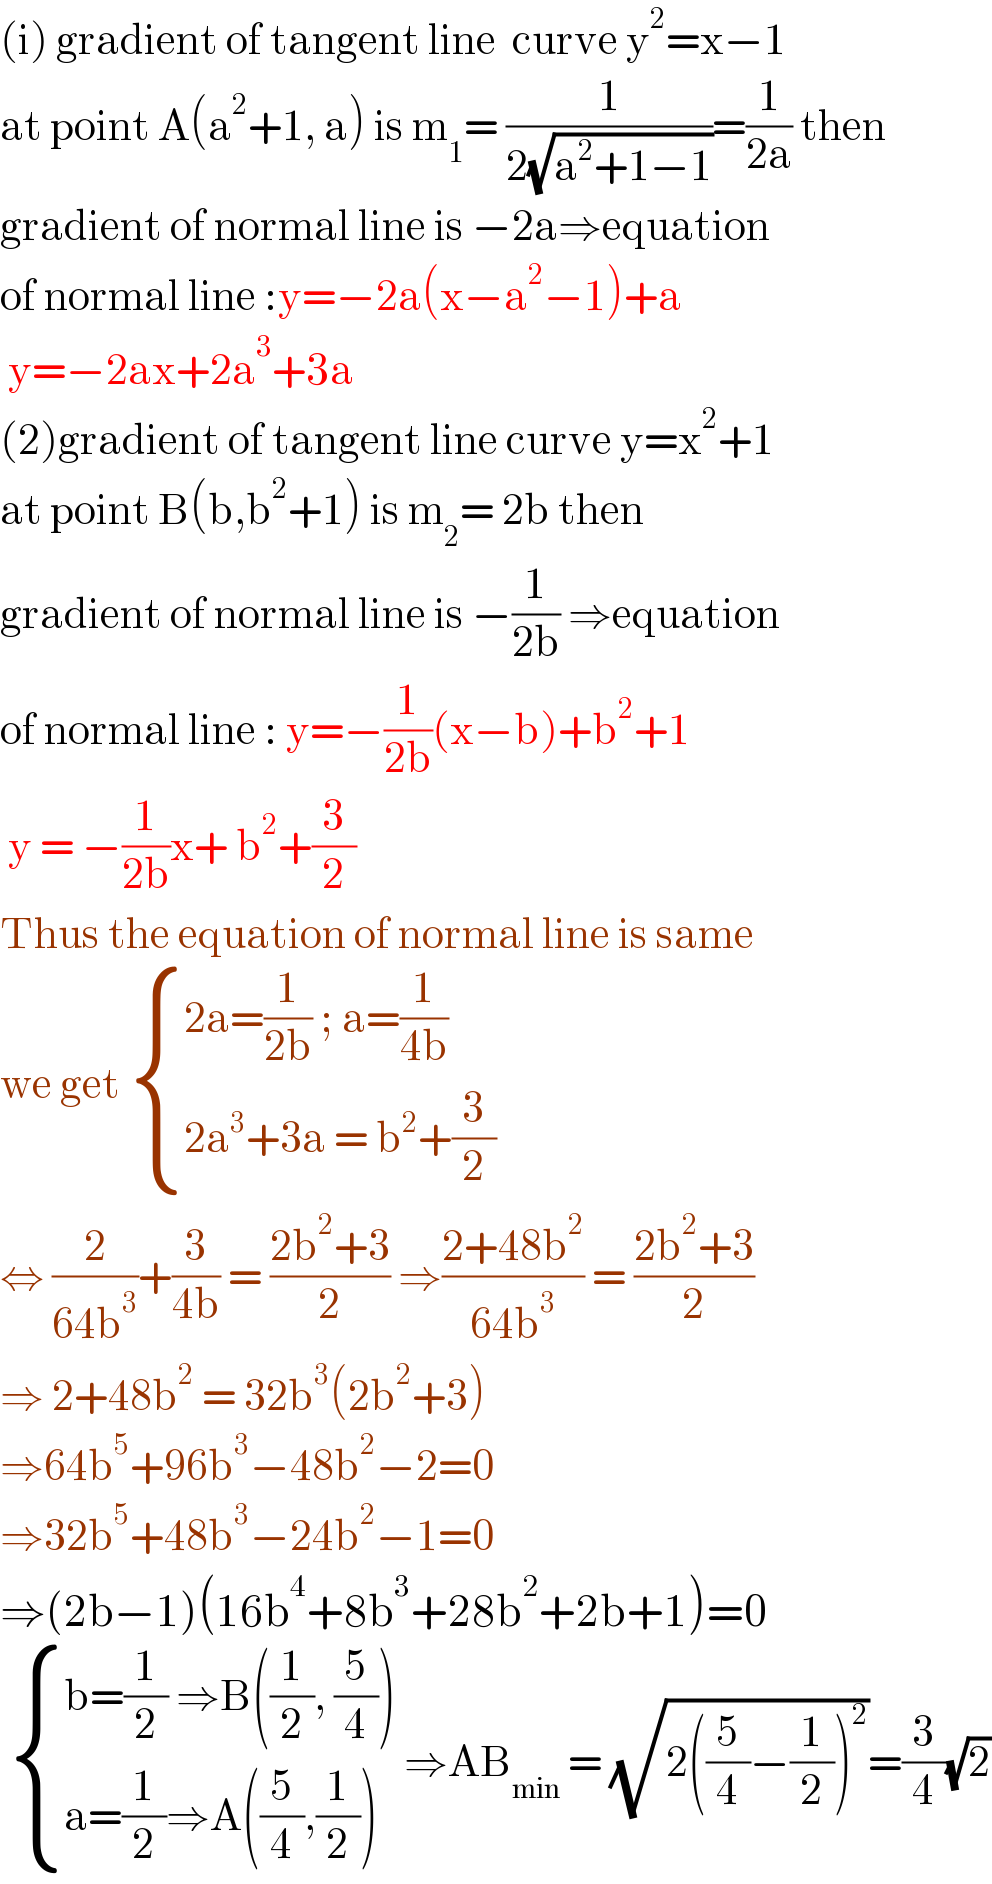 (i) gradient of tangent line  curve y^2 =x−1  at point A(a^2 +1, a) is m_1 = (1/(2(√(a^2 +1−1))))=(1/(2a)) then   gradient of normal line is −2a⇒equation  of normal line :y=−2a(x−a^2 −1)+a   y=−2ax+2a^3 +3a  (2)gradient of tangent line curve y=x^2 +1  at point B(b,b^2 +1) is m_2 = 2b then   gradient of normal line is −(1/(2b)) ⇒equation  of normal line : y=−(1/(2b))(x−b)+b^2 +1   y = −(1/(2b))x+ b^2 +(3/2)  Thus the equation of normal line is same  we get  { ((2a=(1/(2b)) ; a=(1/(4b)))),((2a^3 +3a = b^2 +(3/2))) :}  ⇔ (2/(64b^3 ))+(3/(4b)) = ((2b^2 +3)/2) ⇒((2+48b^2 )/(64b^3 )) = ((2b^2 +3)/2)  ⇒ 2+48b^2  = 32b^3 (2b^2 +3)  ⇒64b^5 +96b^3 −48b^2 −2=0  ⇒32b^5 +48b^3 −24b^2 −1=0  ⇒(2b−1)(16b^4 +8b^3 +28b^2 +2b+1)=0    { ((b=(1/2) ⇒B((1/2), (5/4)))),((a=(1/2)⇒A((5/4),(1/2)))) :} ⇒AB_(min)  = (√(2((5/4)−(1/2))^2 ))=(3/4)(√2)  